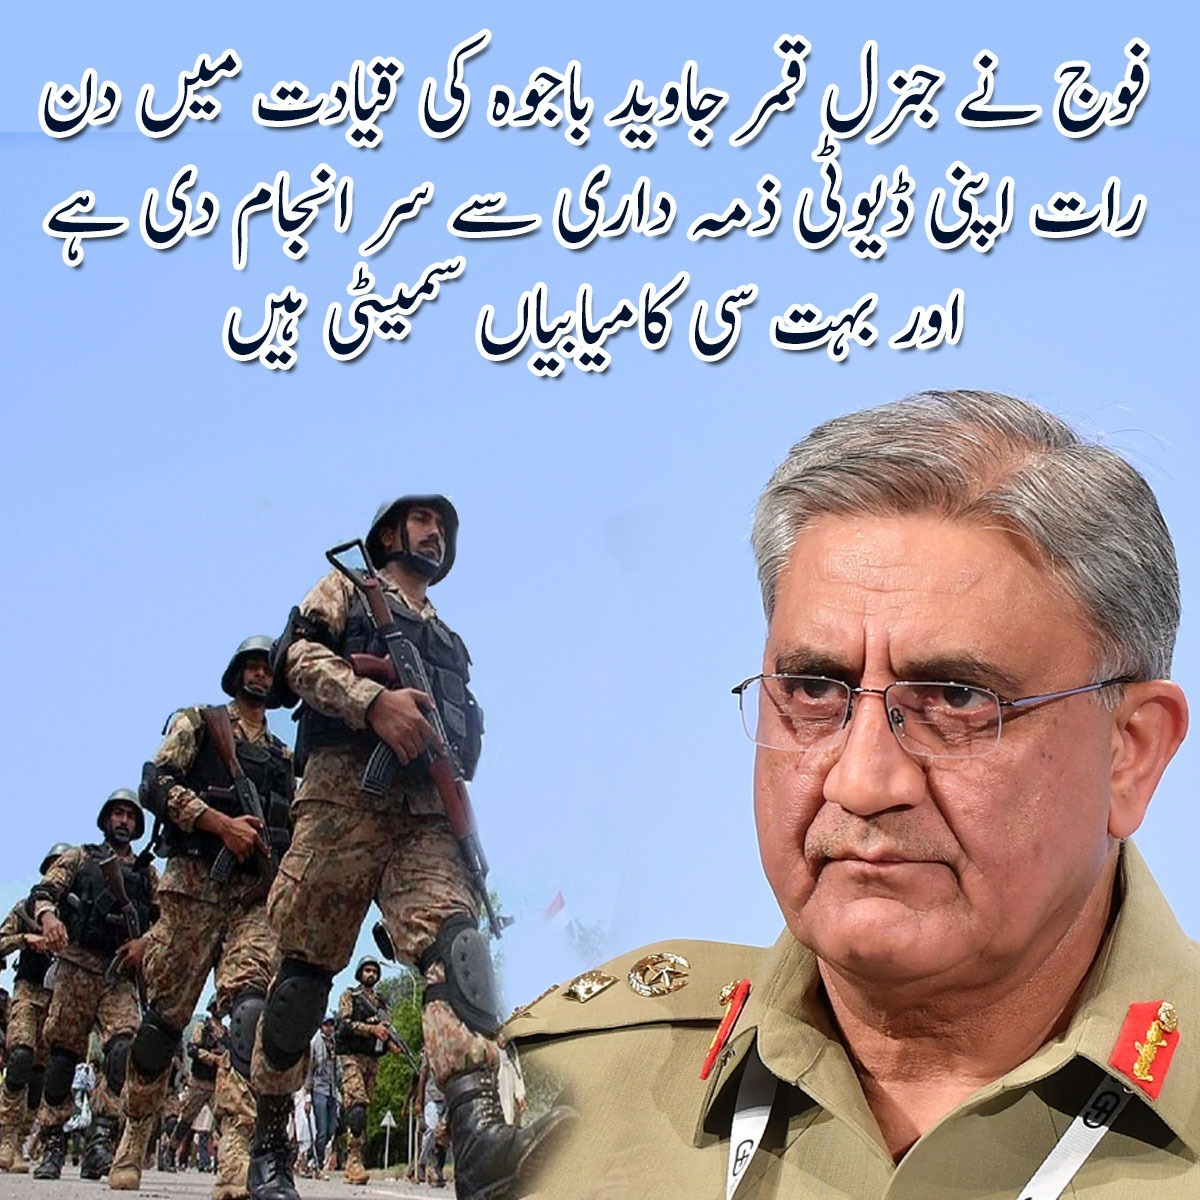 He is our Pak Army. The Pakistan Army is the only army in the world that loves its people more than itself
#BehindYouBajwa
#GenBajwaWillStay